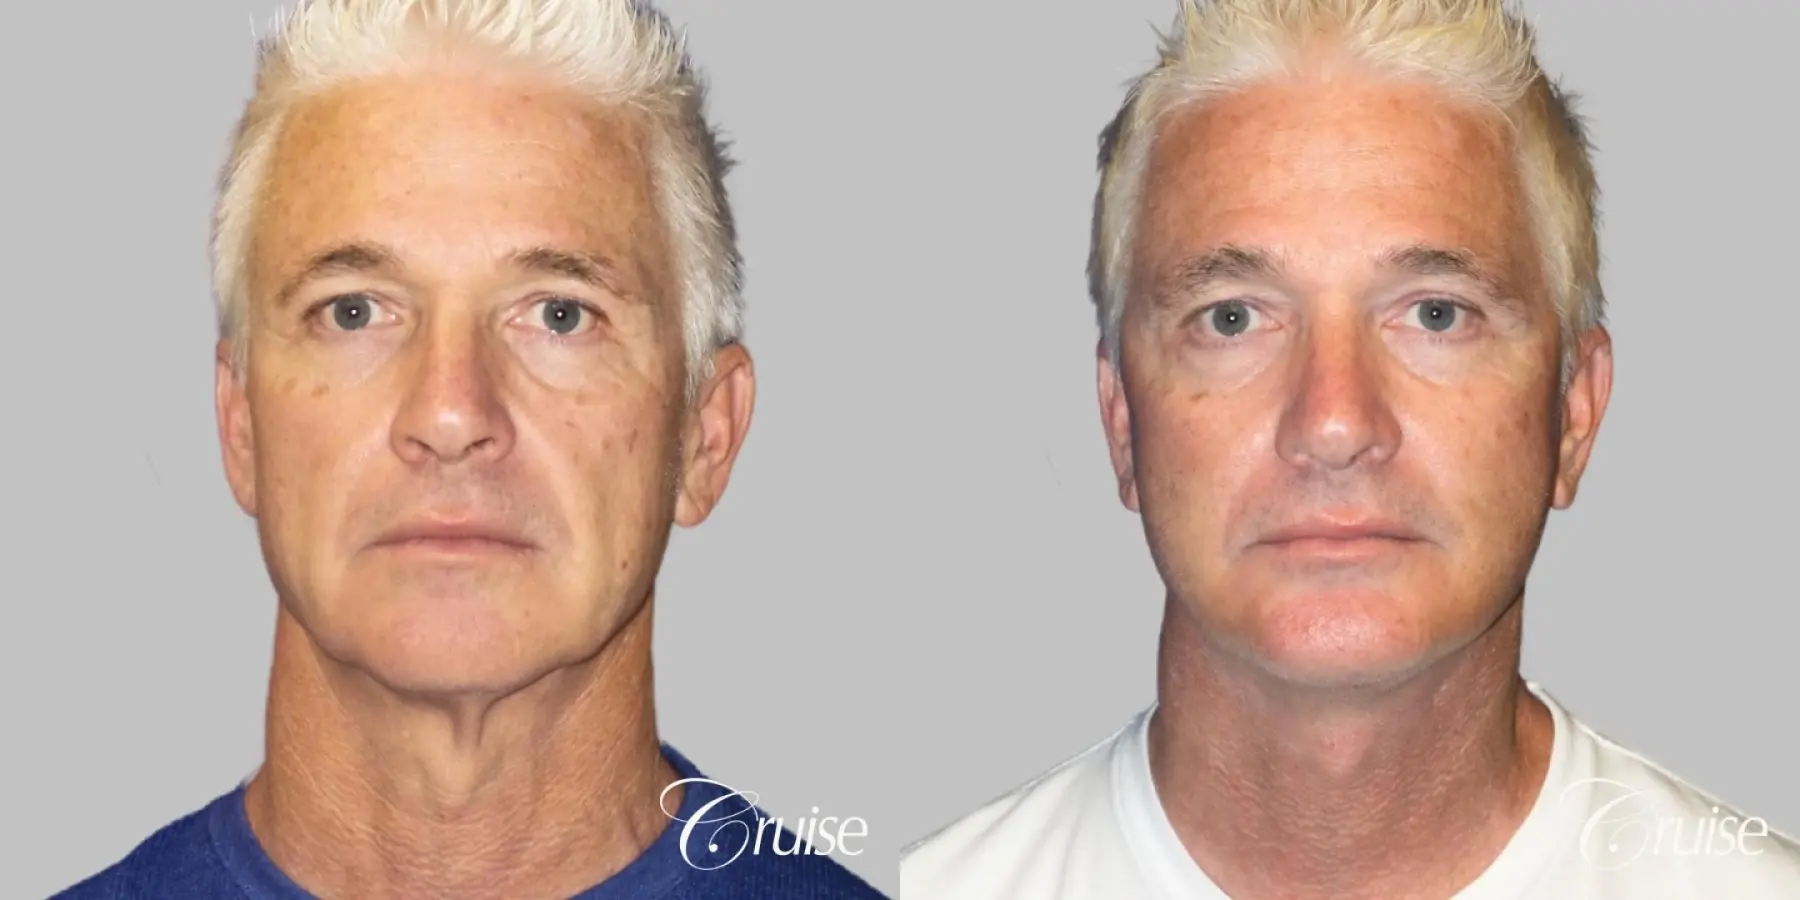 Male neck lift before and after - Before and After